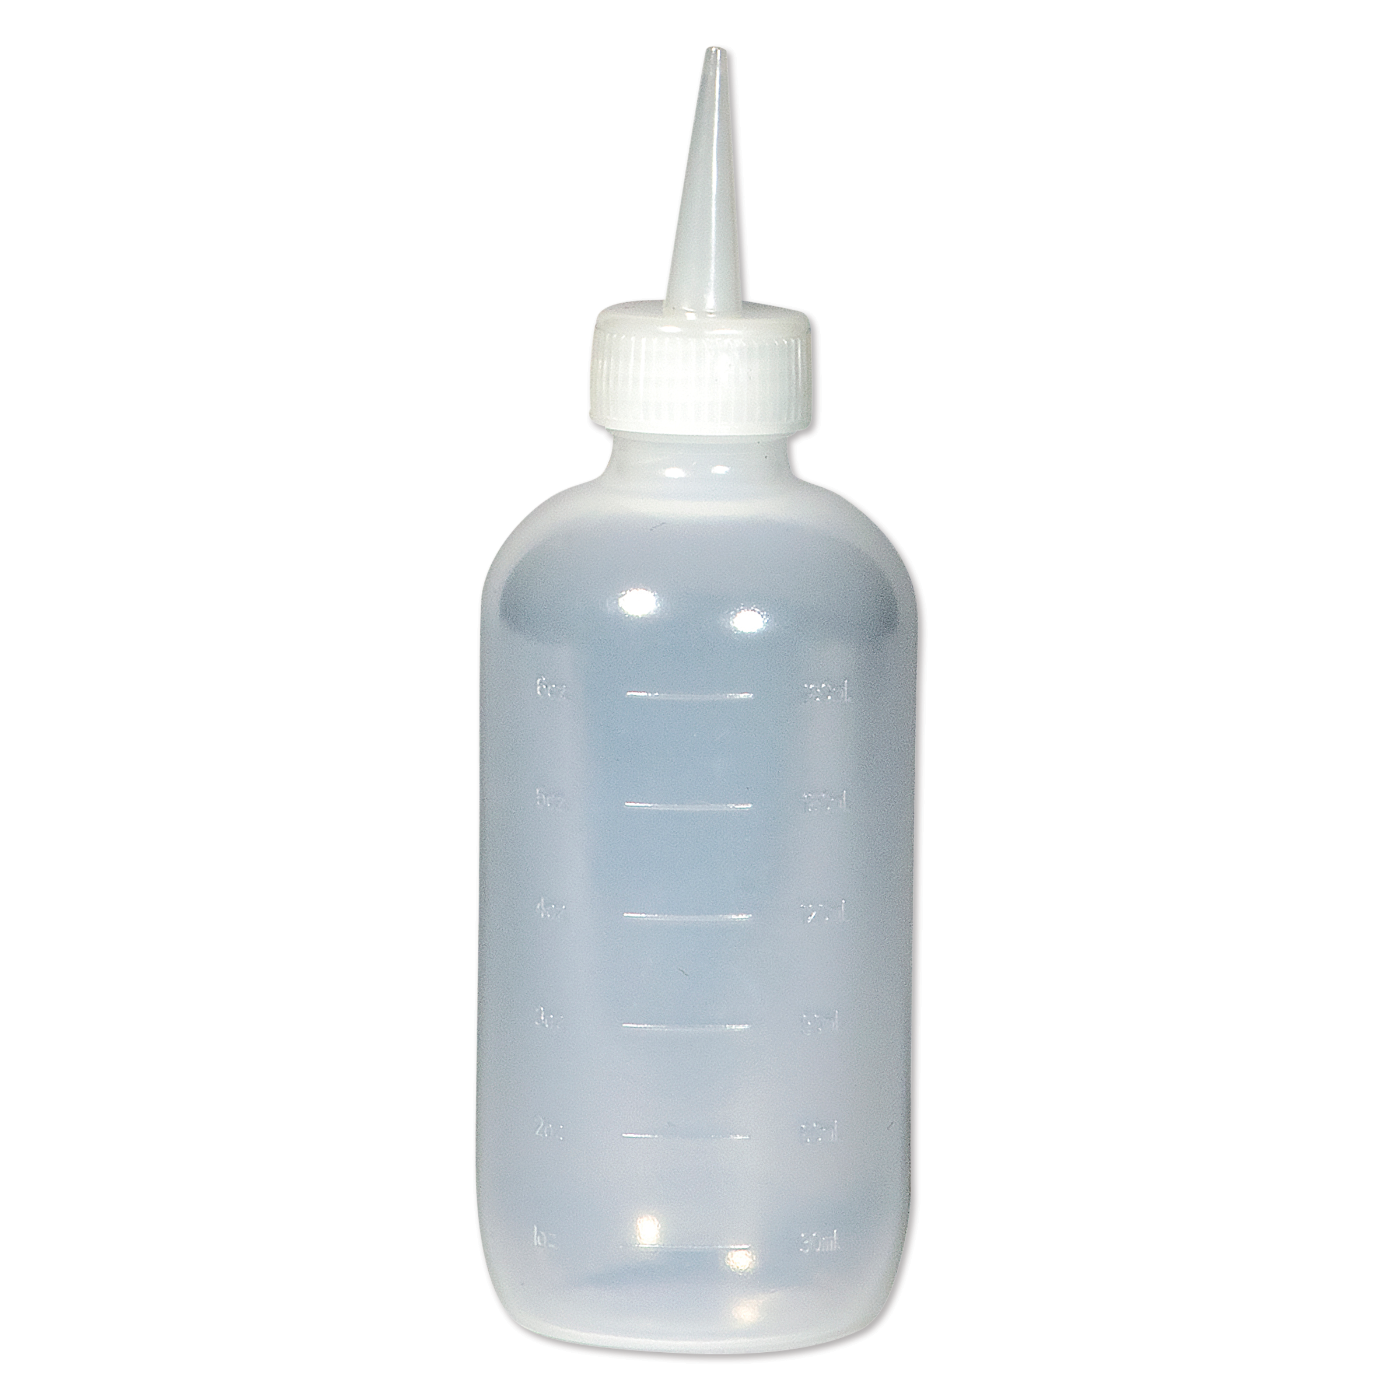 Applicator Bottle with Long Thin Tip - 6 oz.